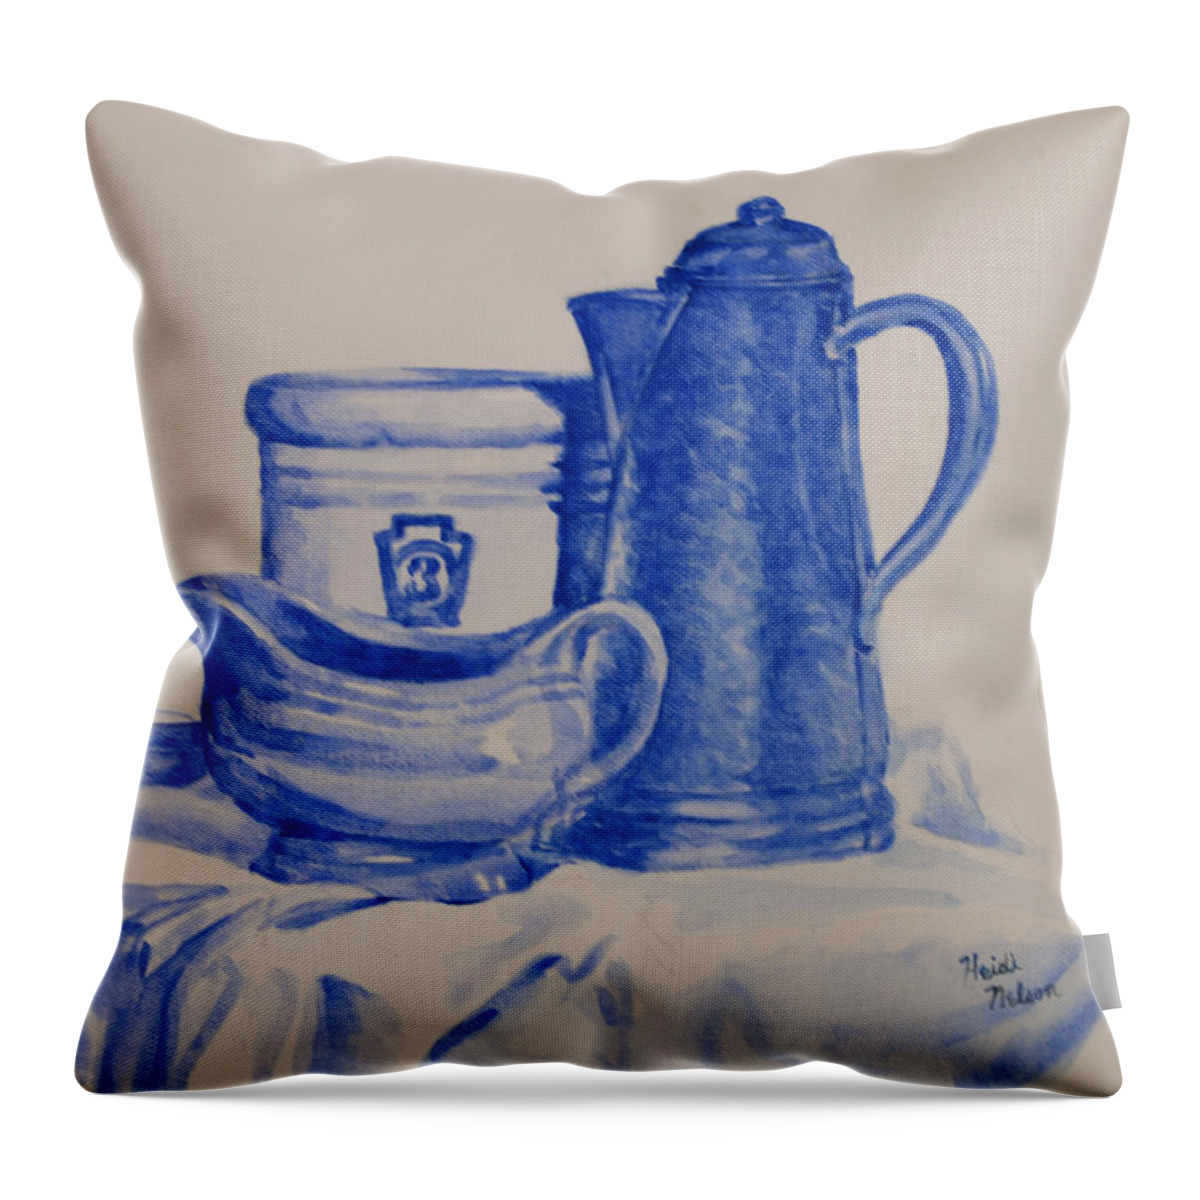 Still Life. Crock Throw Pillow featuring the painting Value Study in Blue by Heidi E Nelson